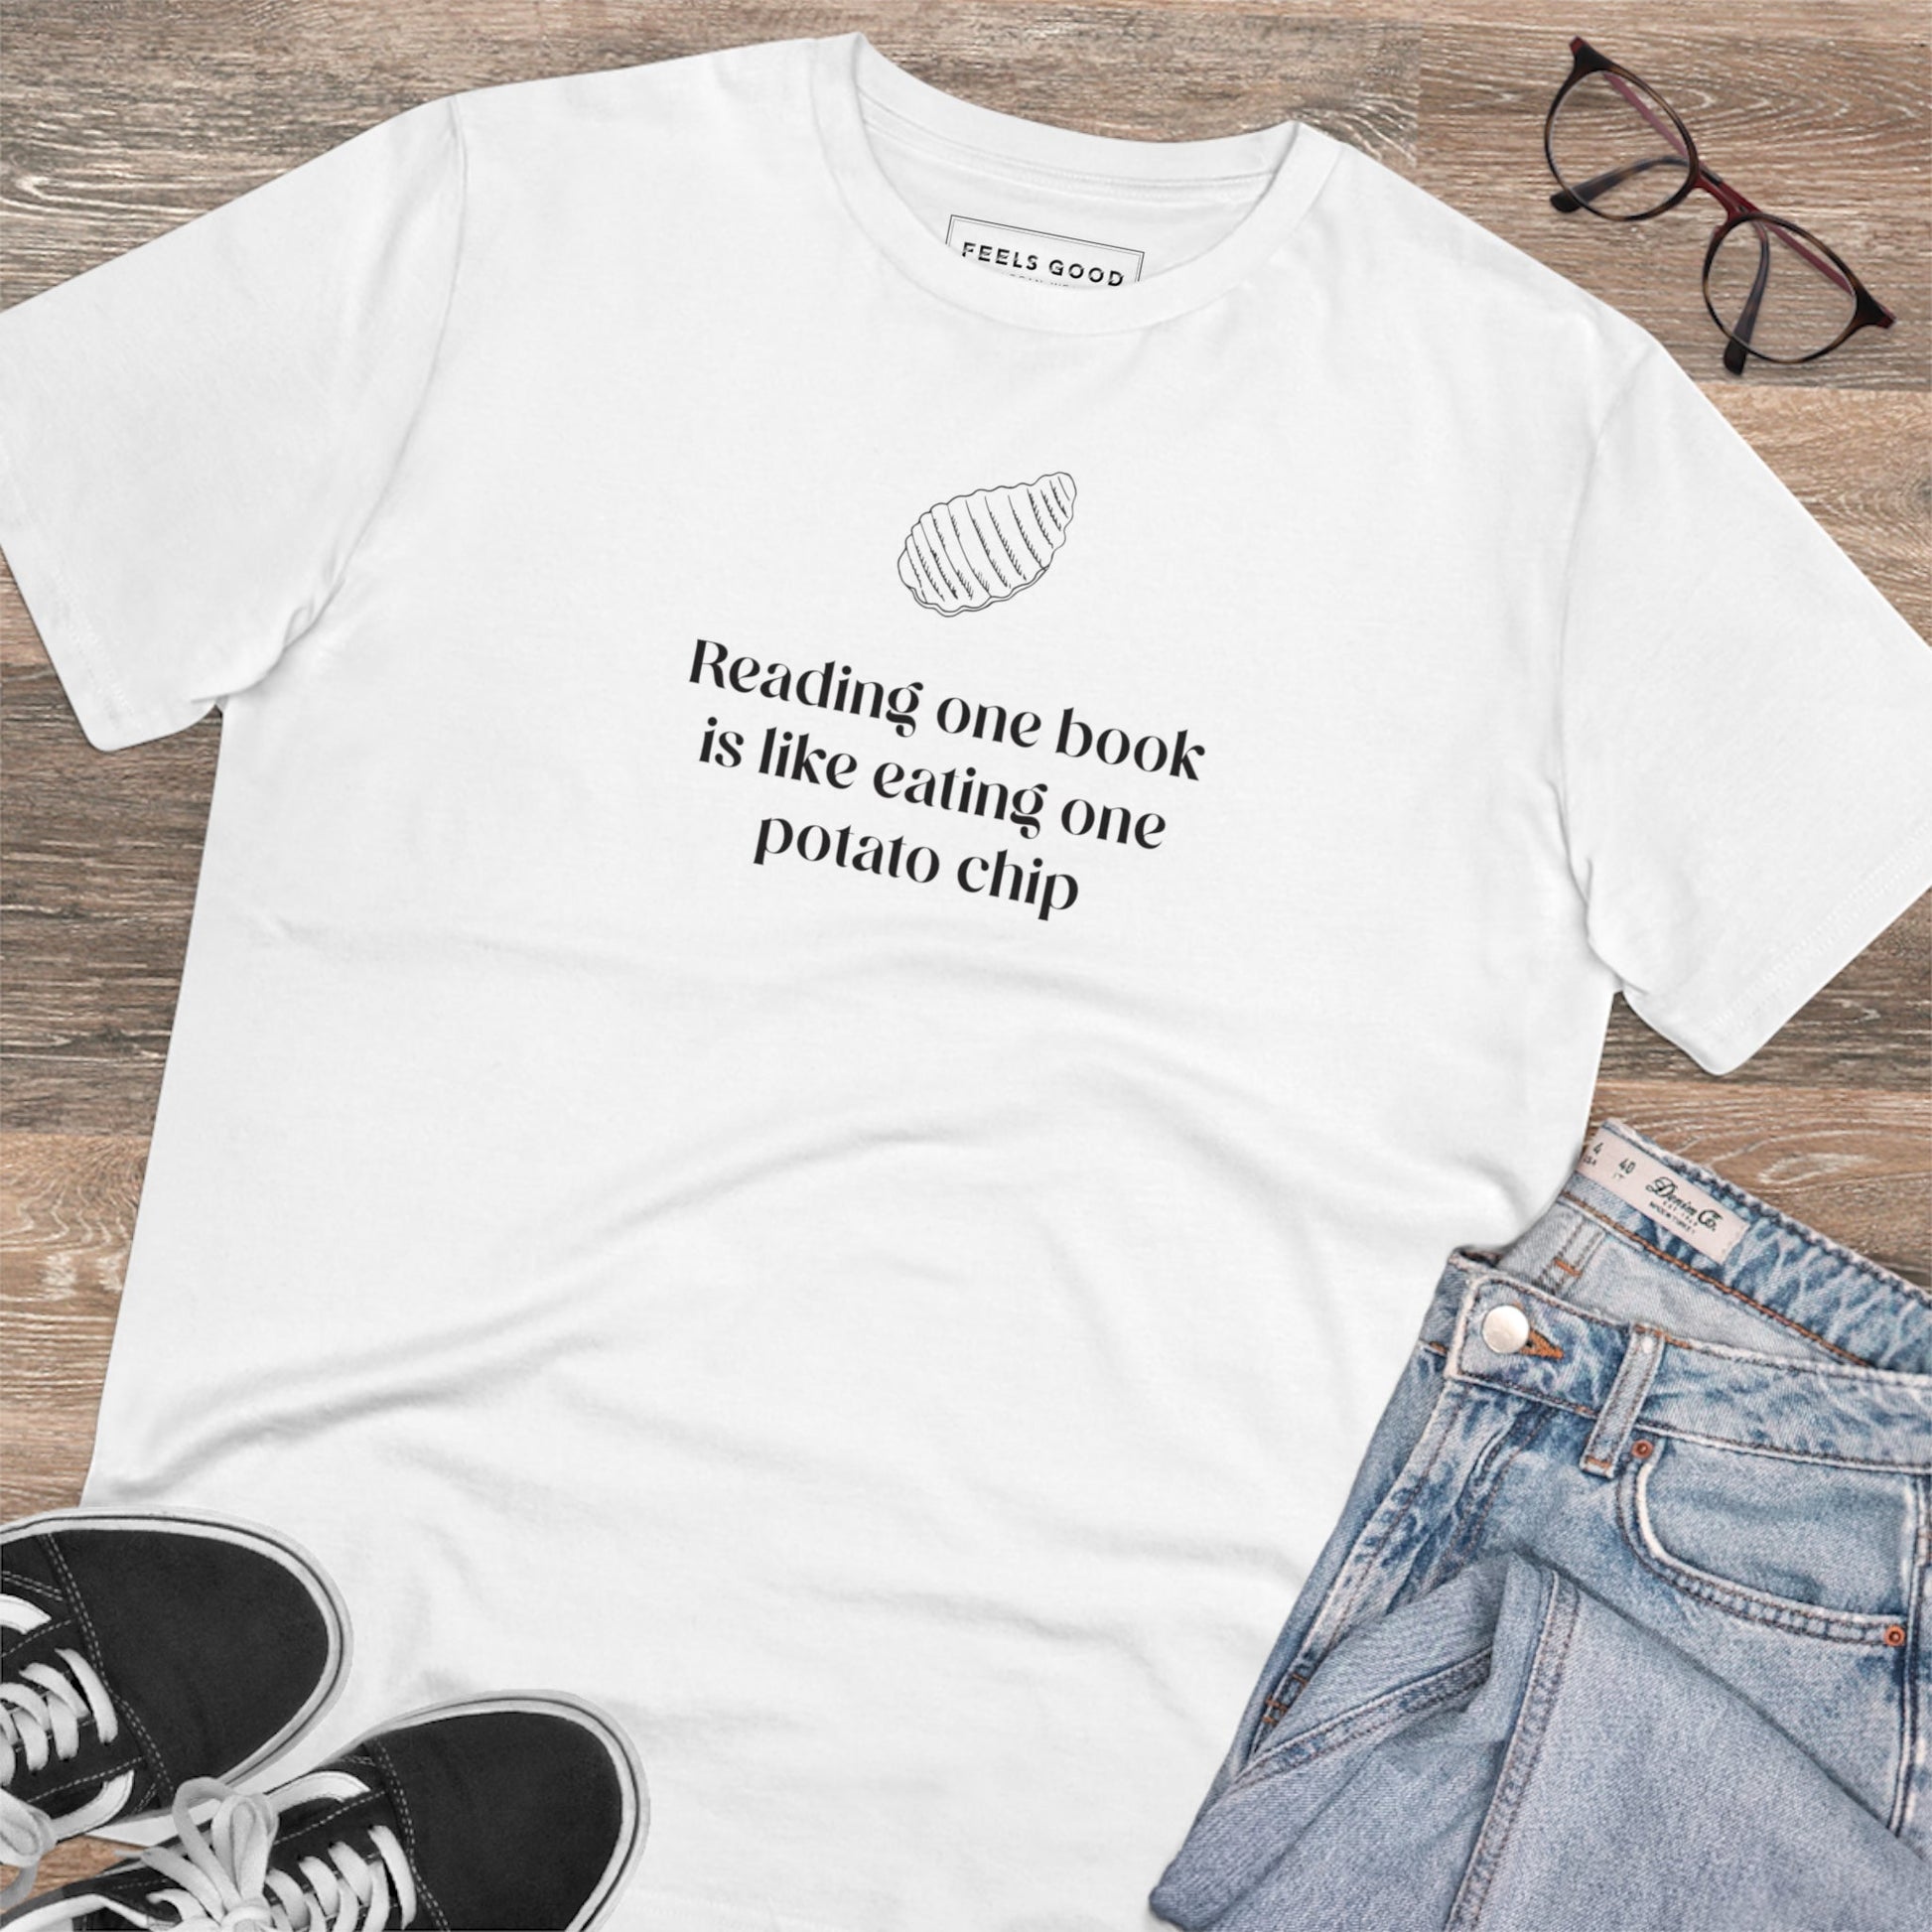 Books 'Can I Have More' Organic Cotton T-shirt - Book worm